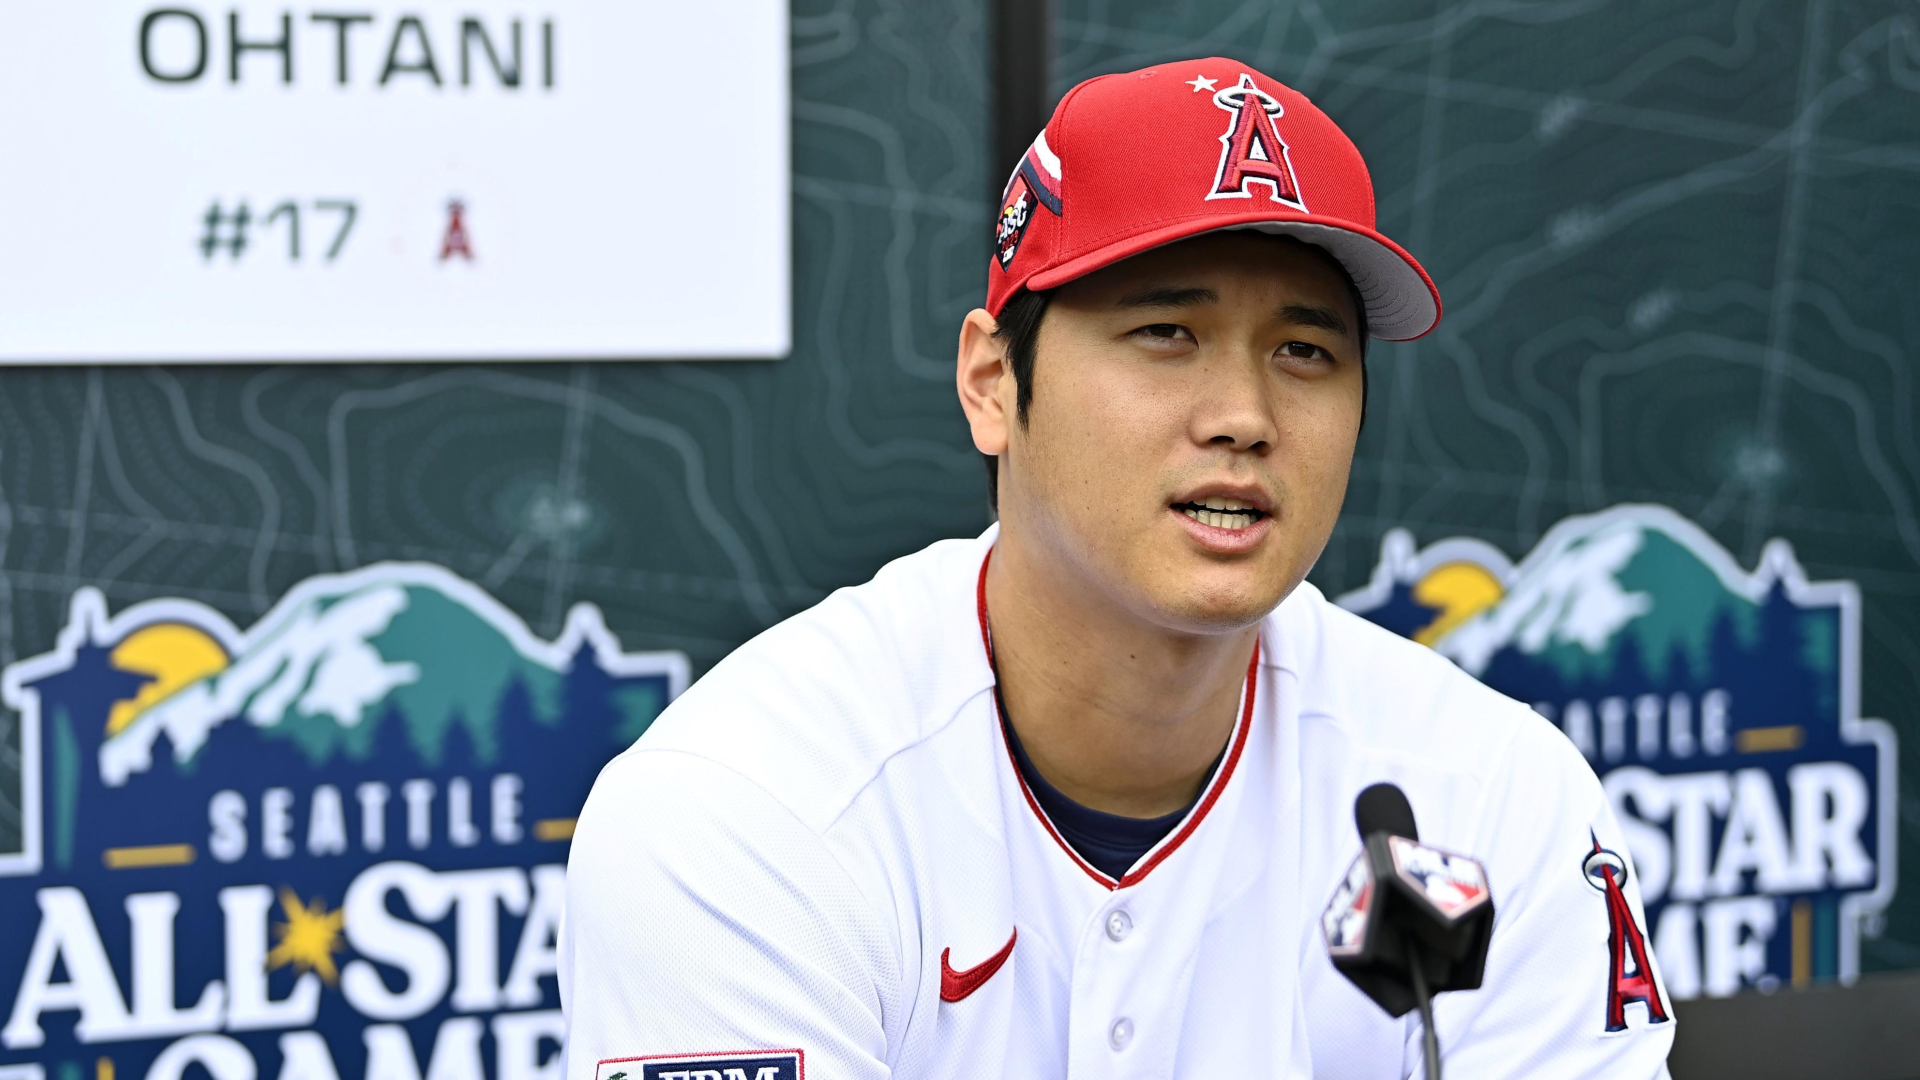 MLB All-Star Game: Yankees lead way with 6 players, Shohei Ohtani